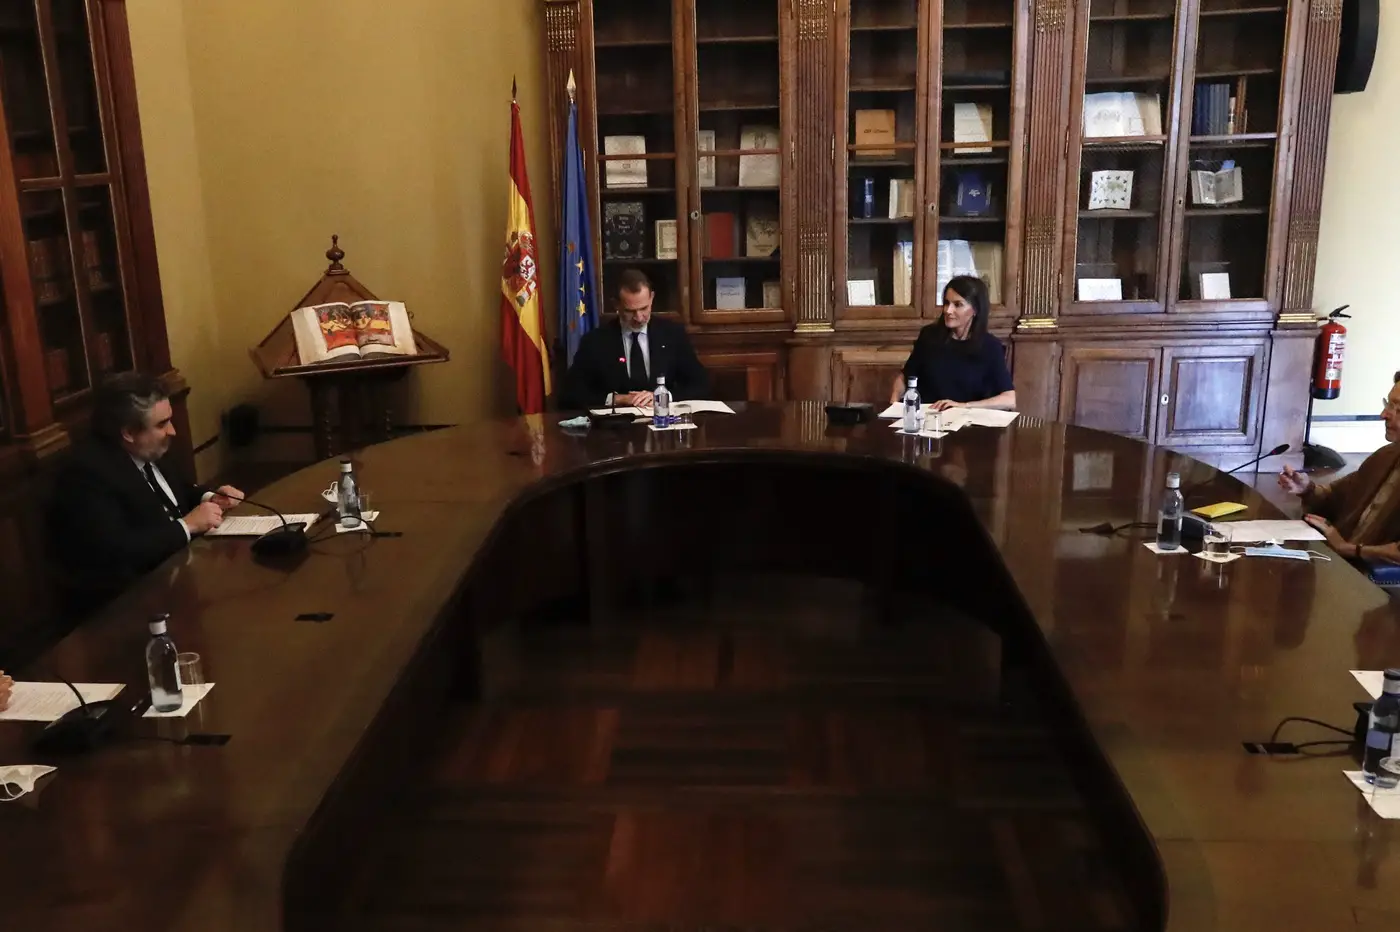 King Felipe and Queen Letizia with the Permanent Commission of the National Library of Spain